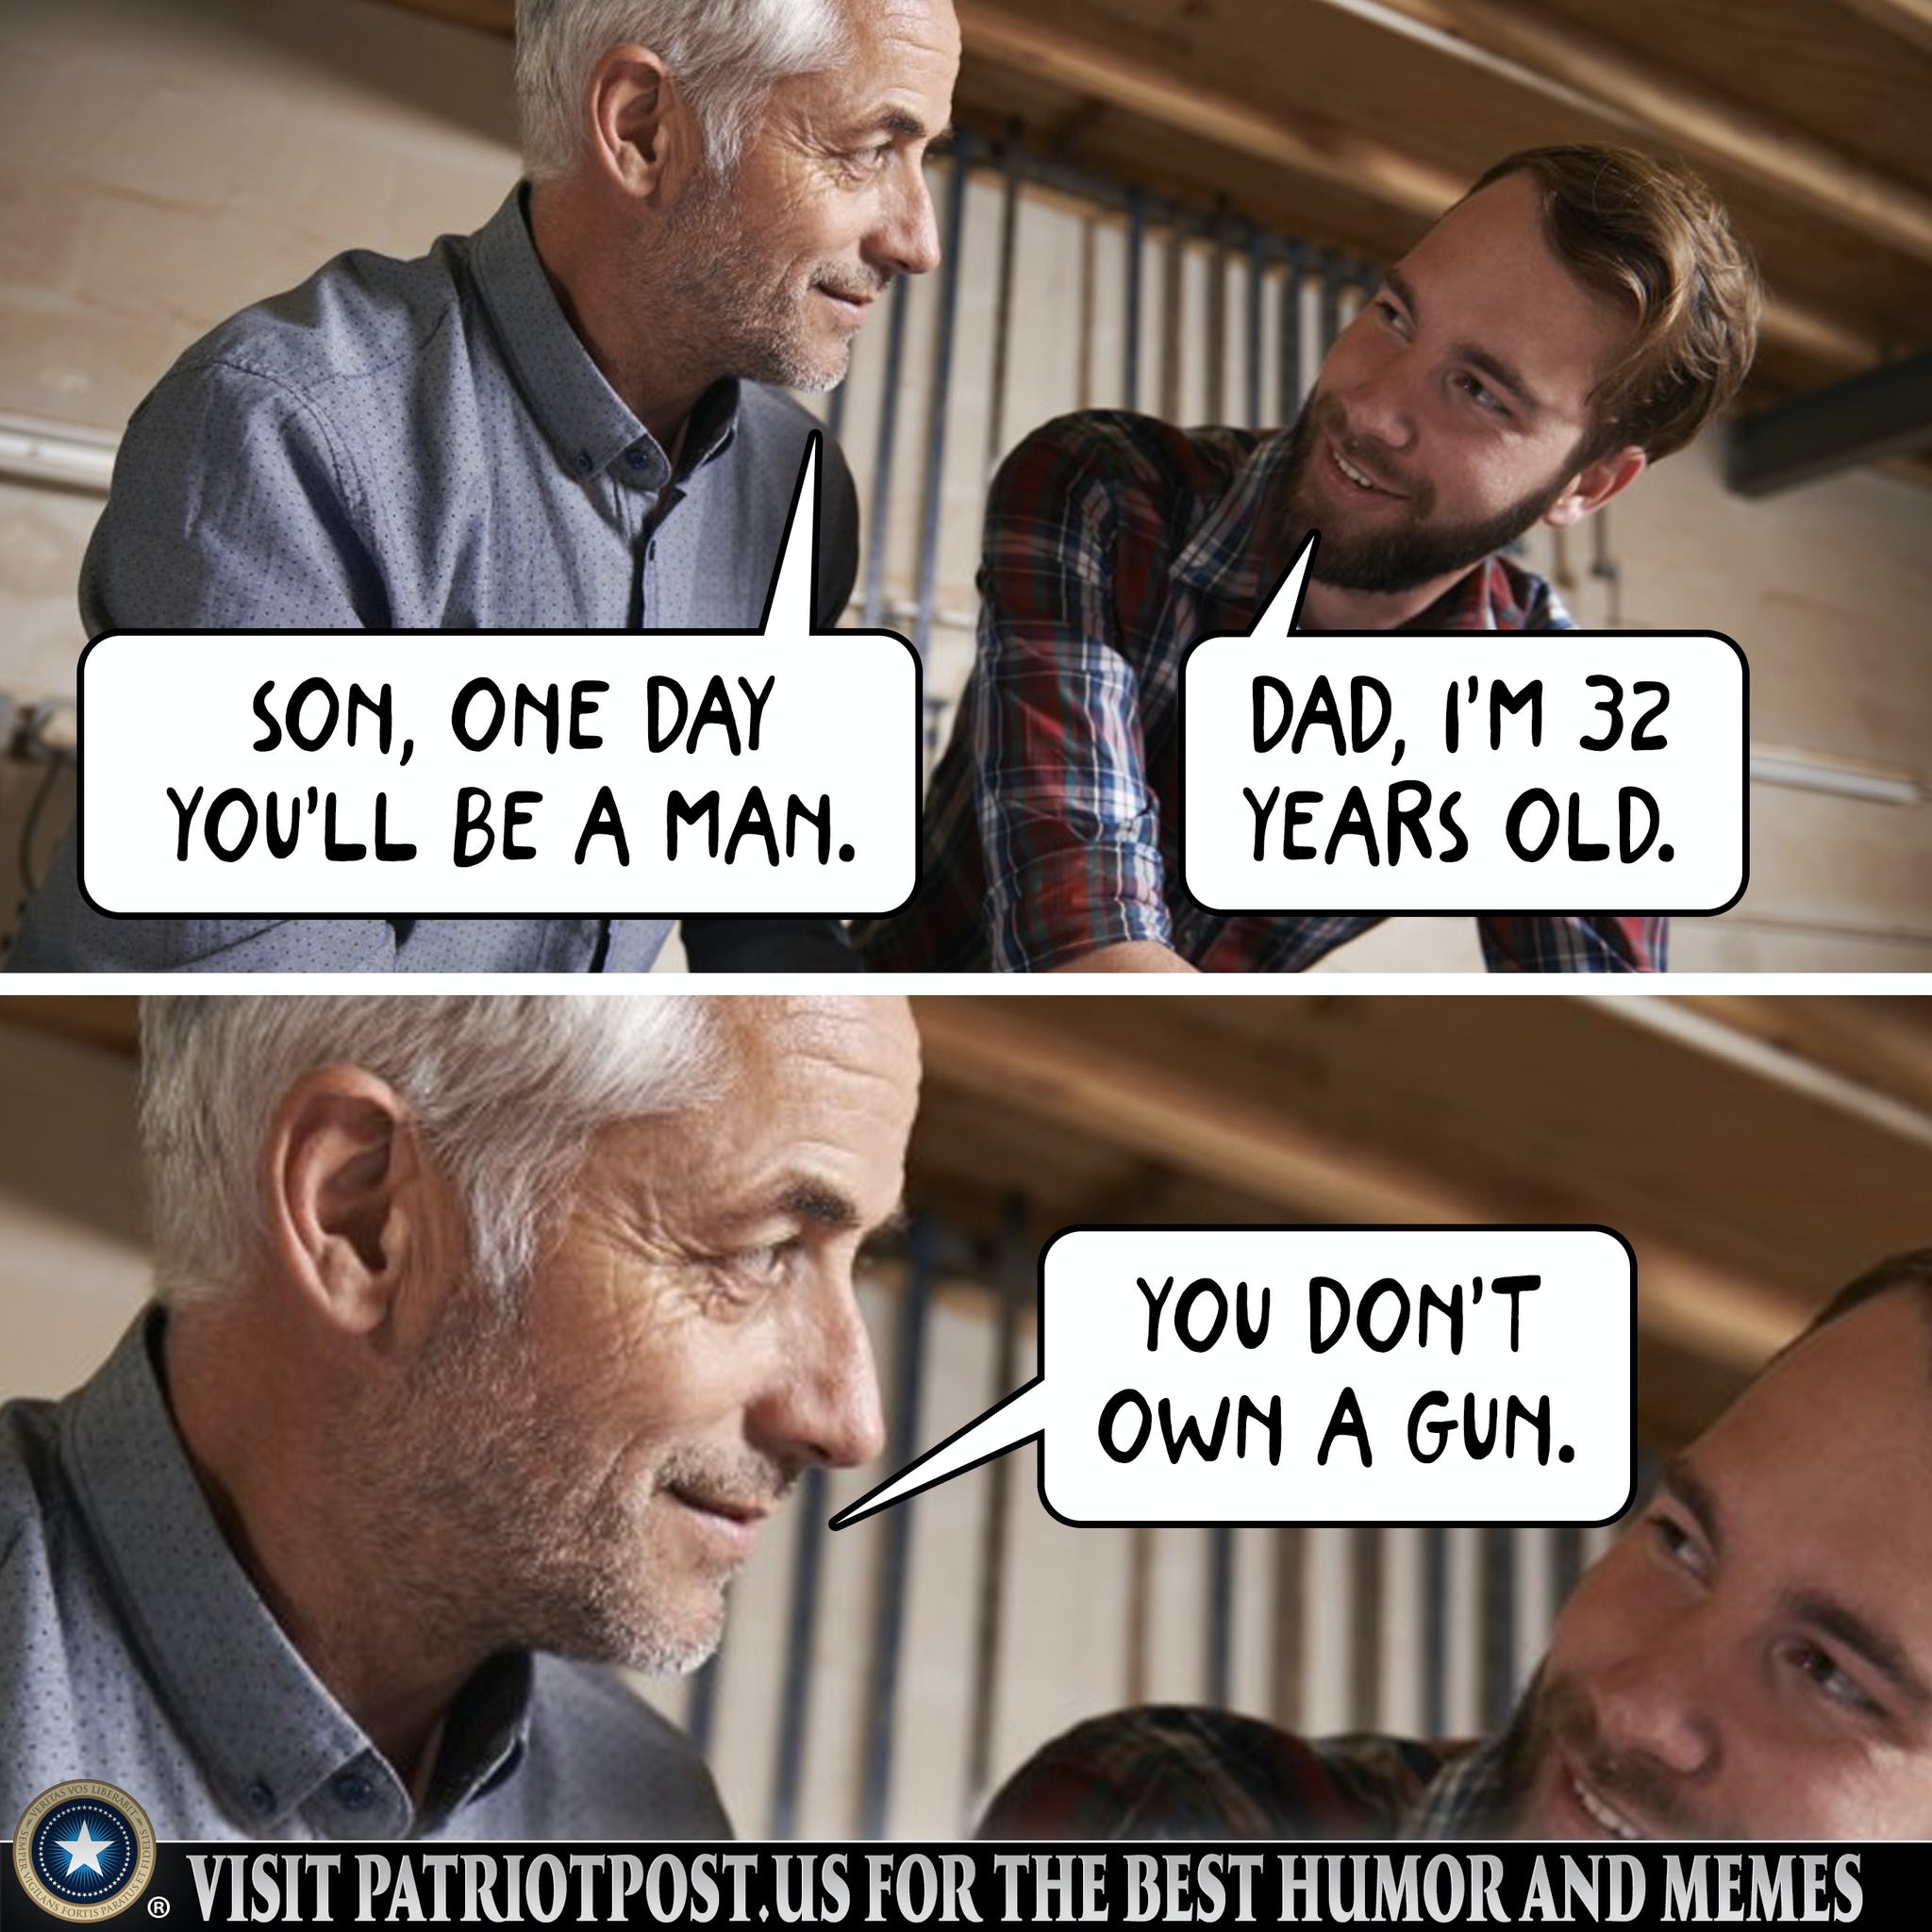 One day, son